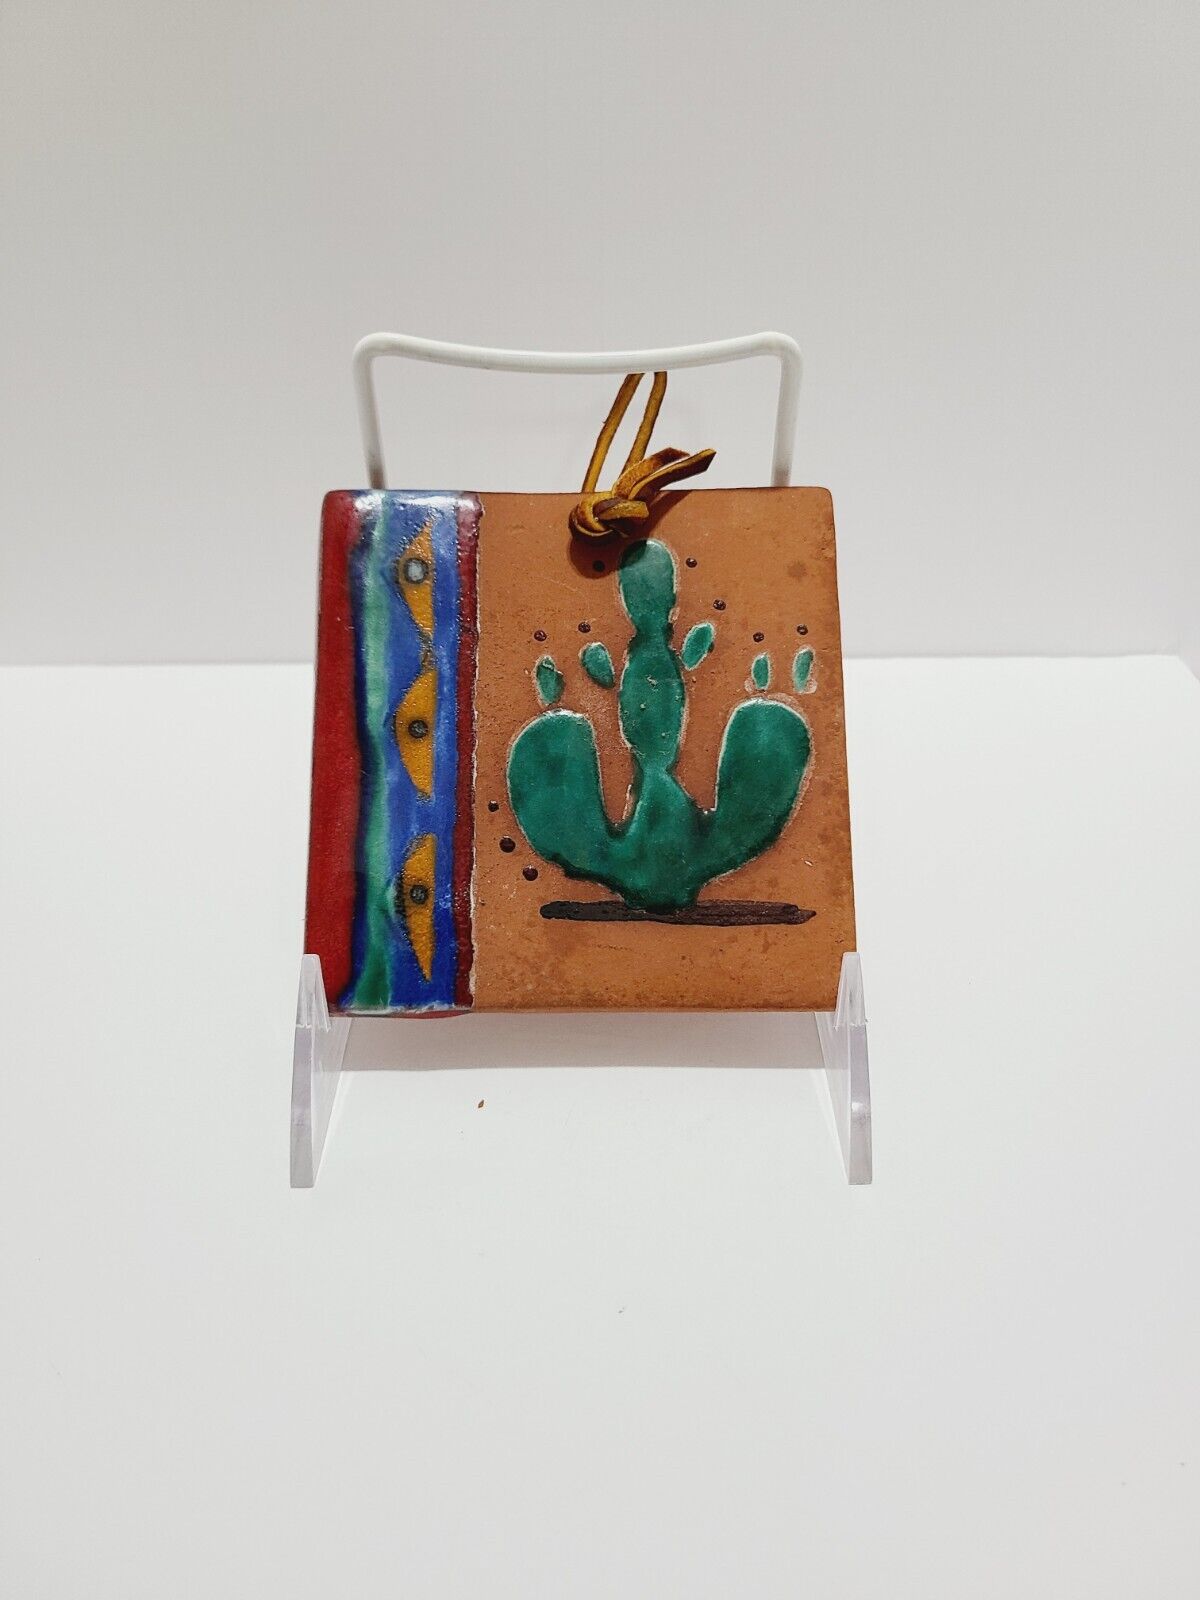 Made In Mexico Handpainted Terracotta Clay Tile Cactus Theme Artist Signed 